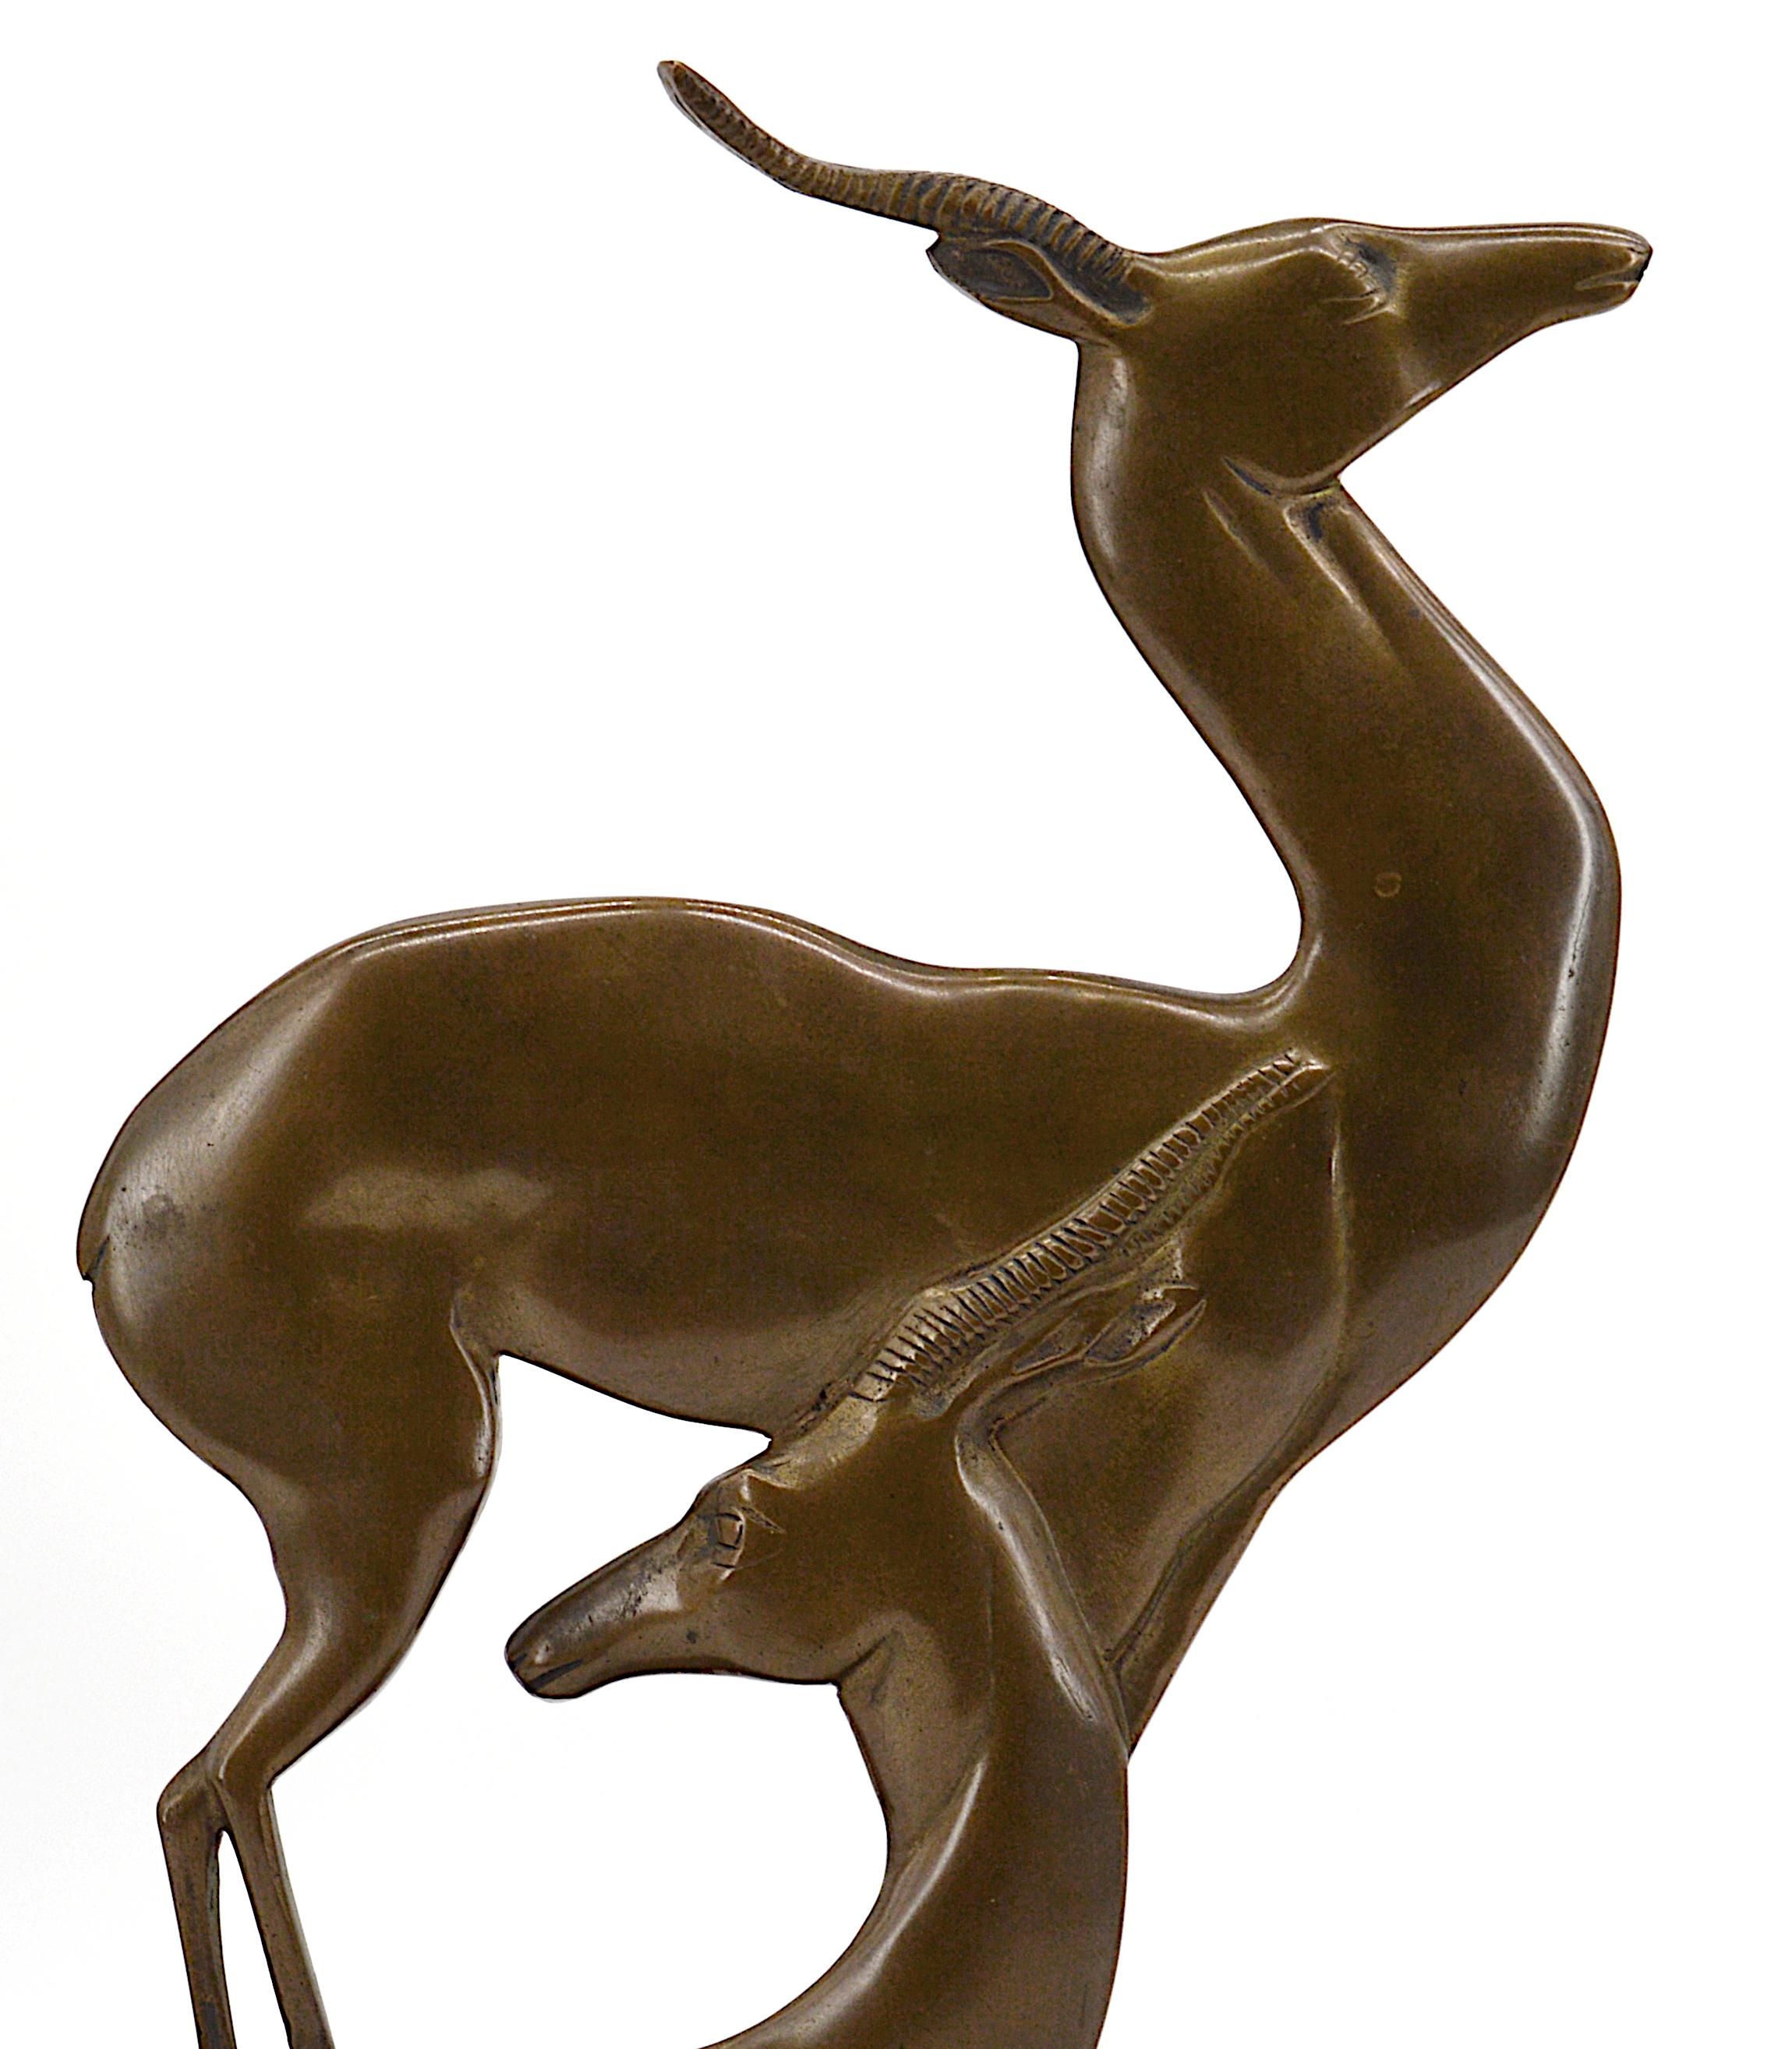 French Art Deco antelope couple sculpture, France, 1930s. Bronze and marble. Superb model, pure and sharp.